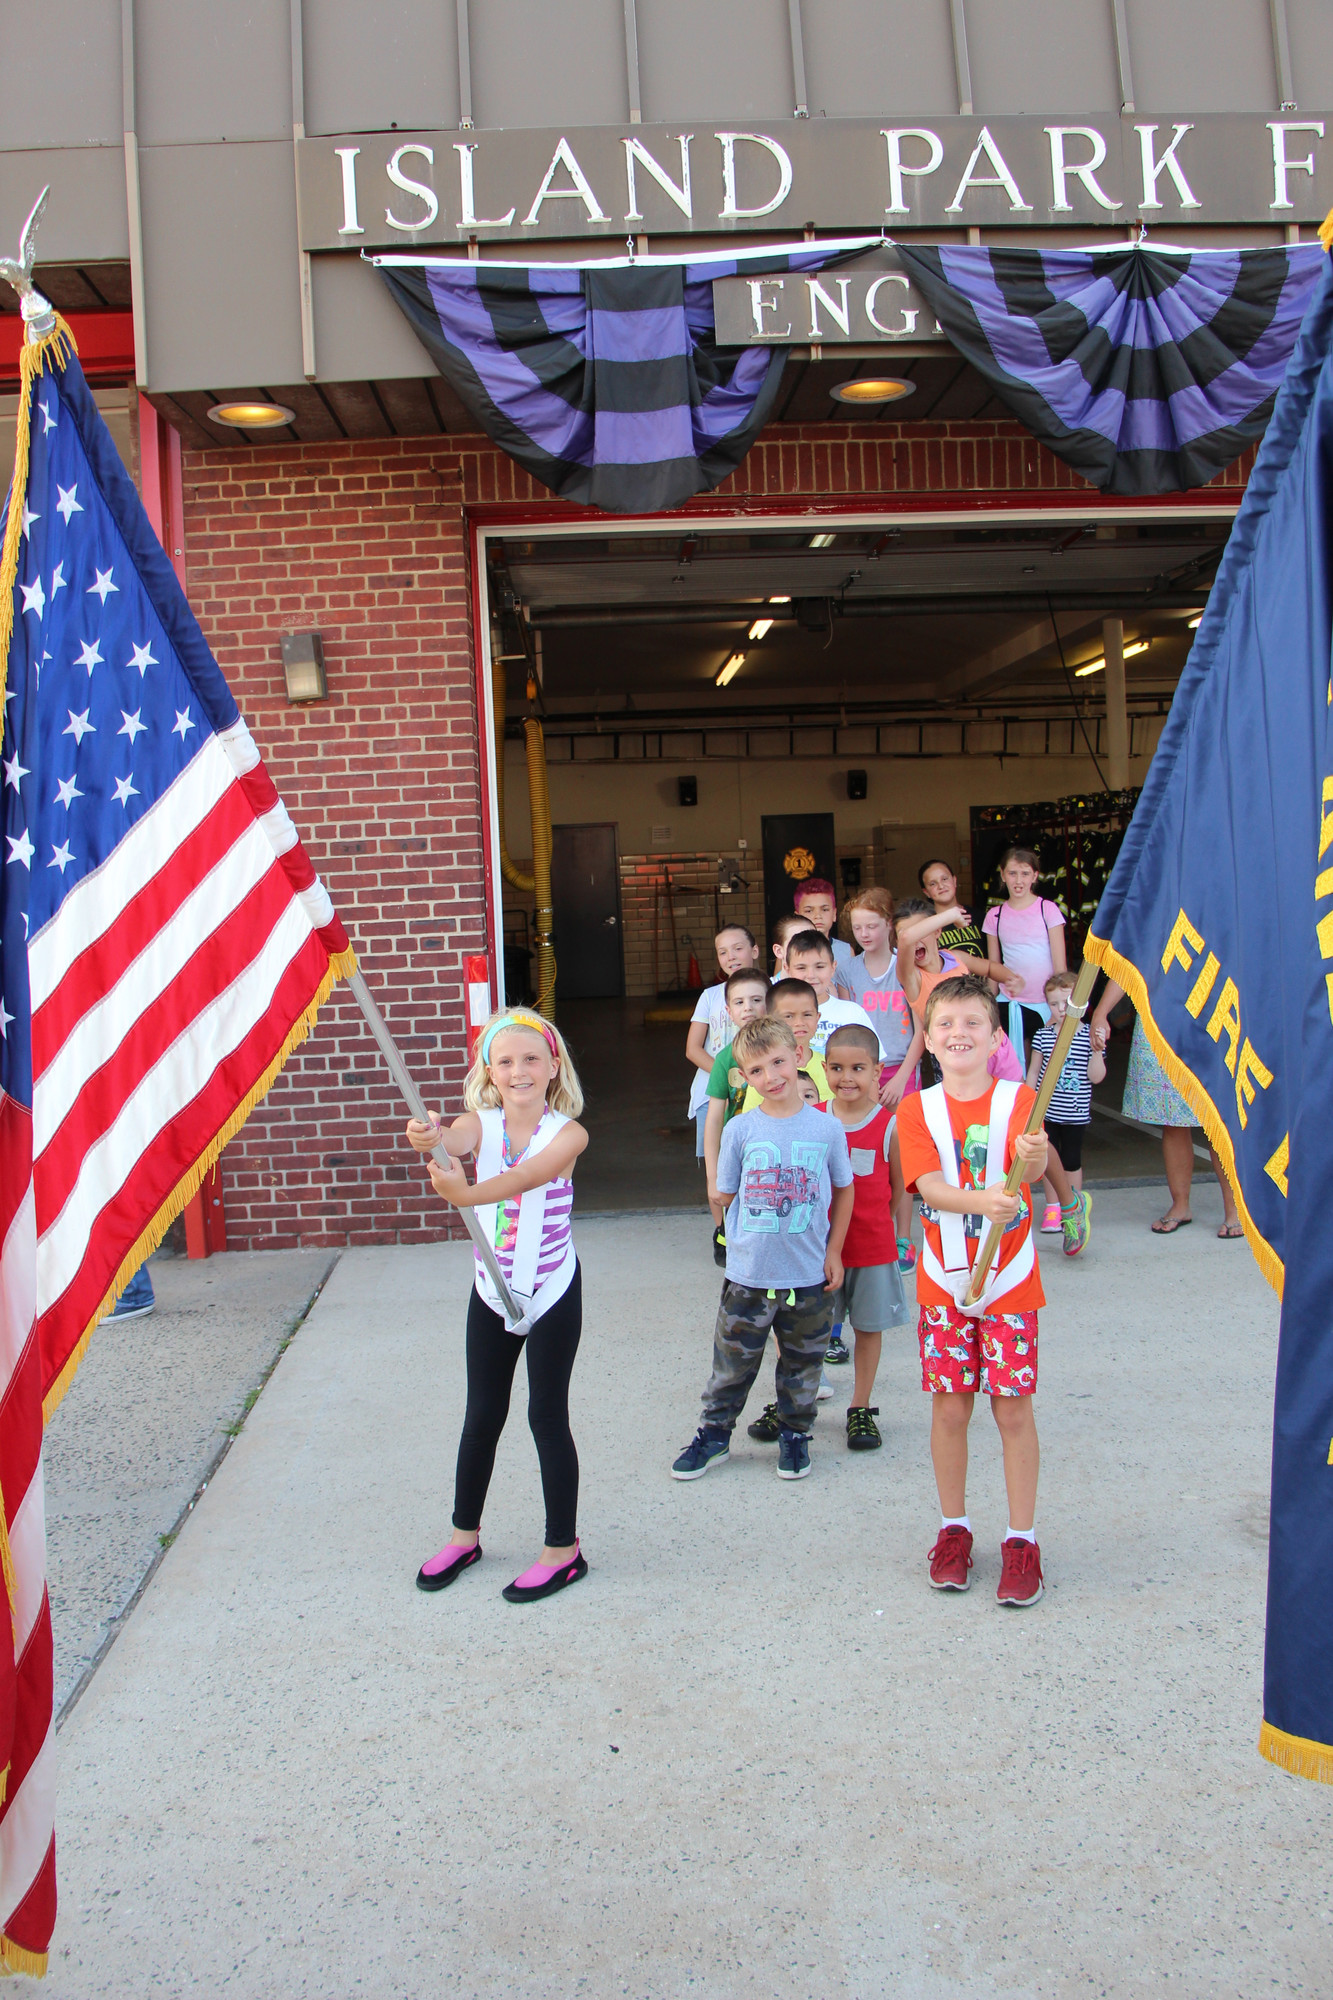 Madison Brandt and Matthew Fletcher carried the flags for the IP Jr. Firemen’s Parade